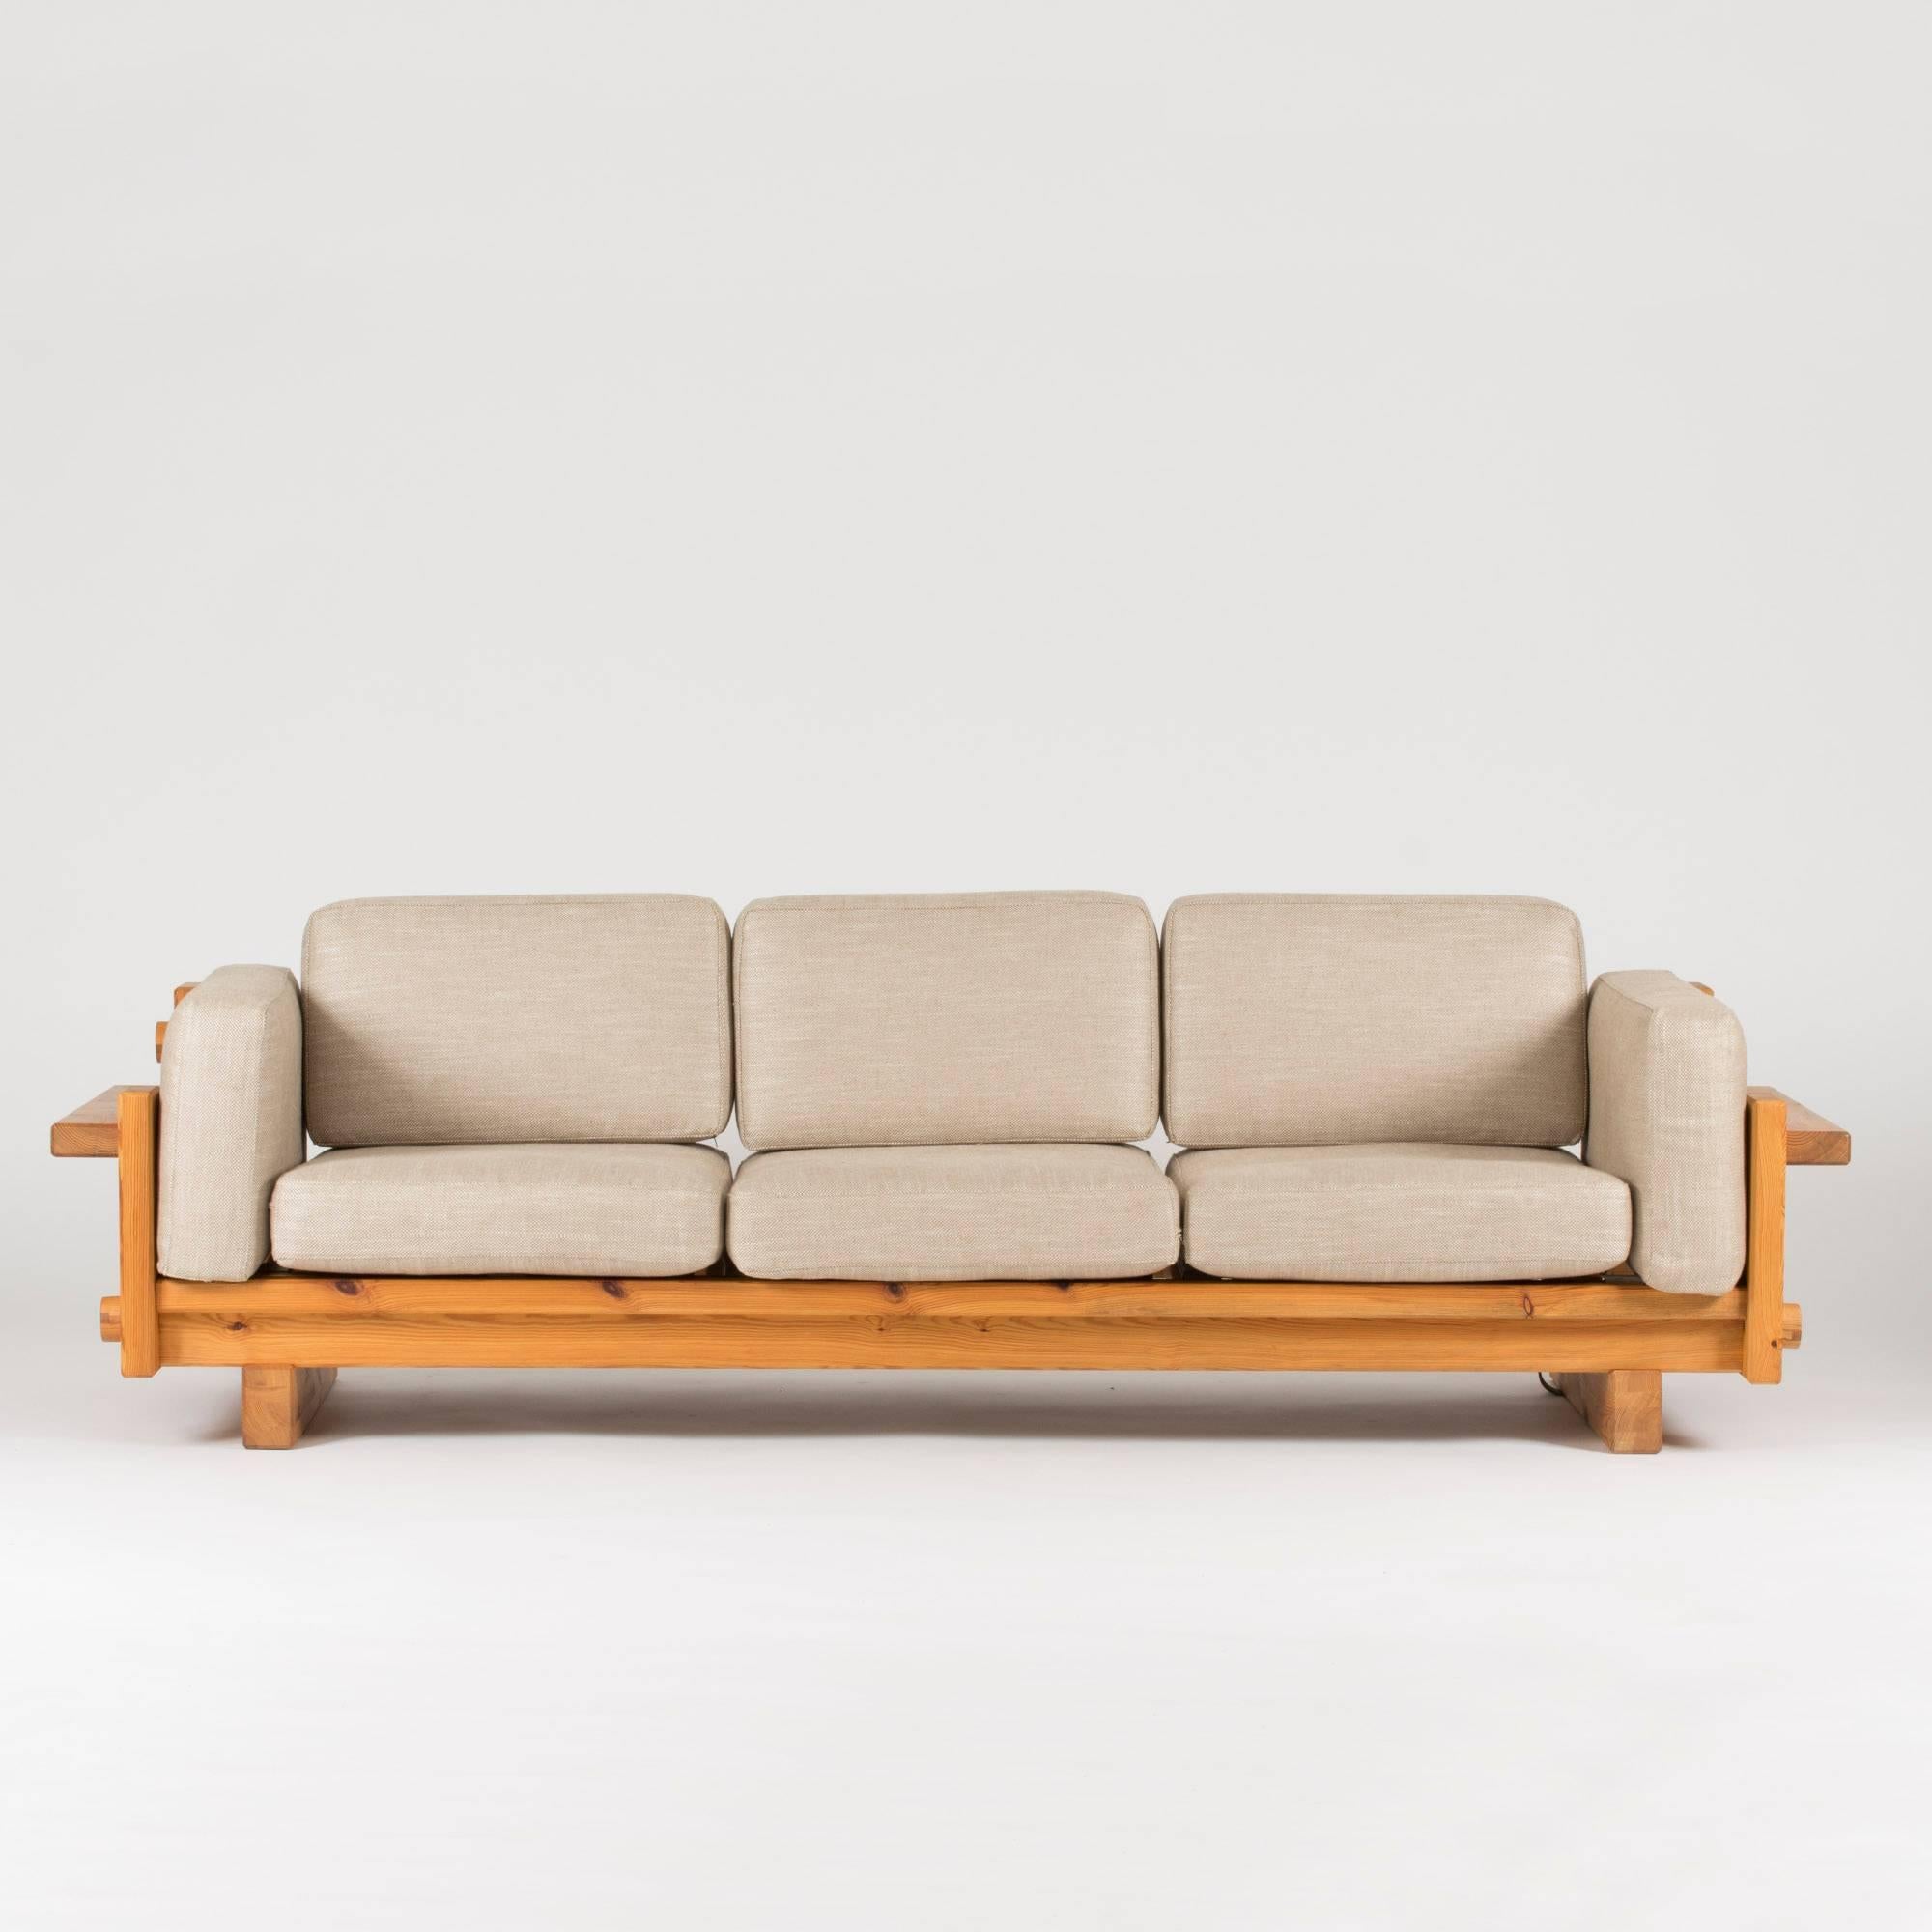 Sturdy, chunky solid pine sofa by Yngve Ekström for Swedese, made in the 1970s. Removable cushions with sand-colored, linen fabric.